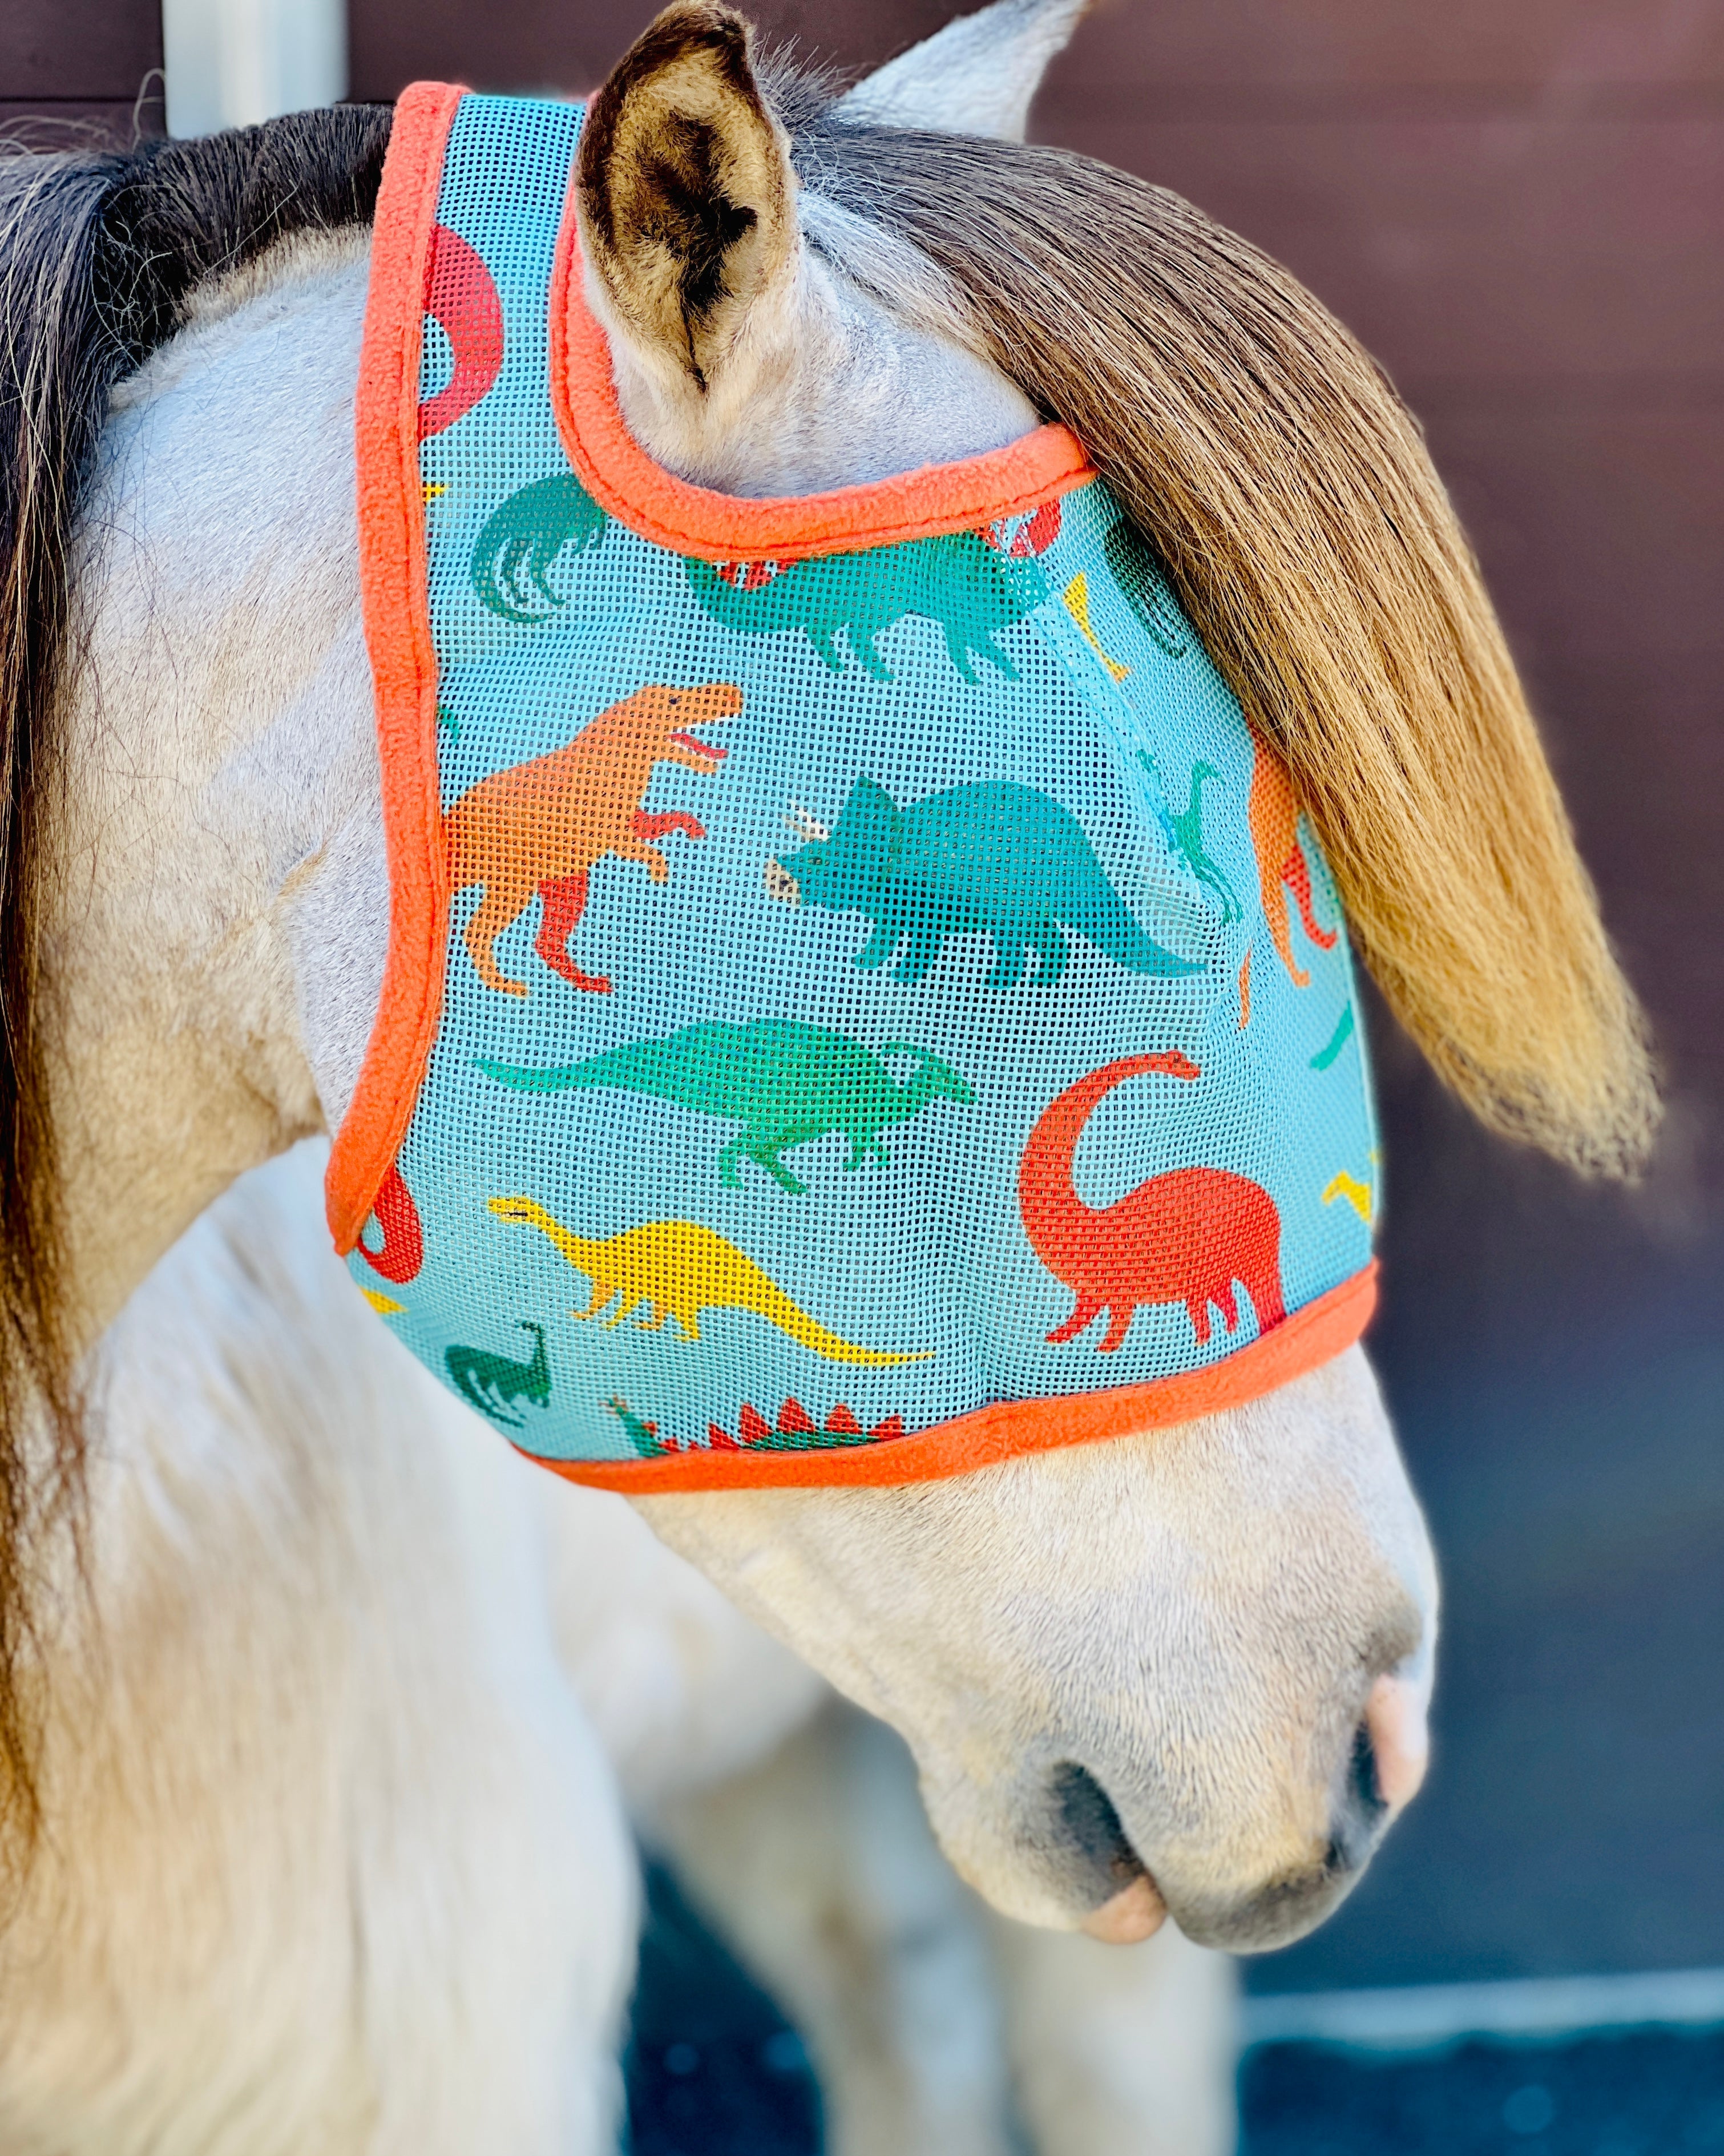 Star Point Dinosaur Fly Mask (Mini to Horse Size) - Equiluxe Tack